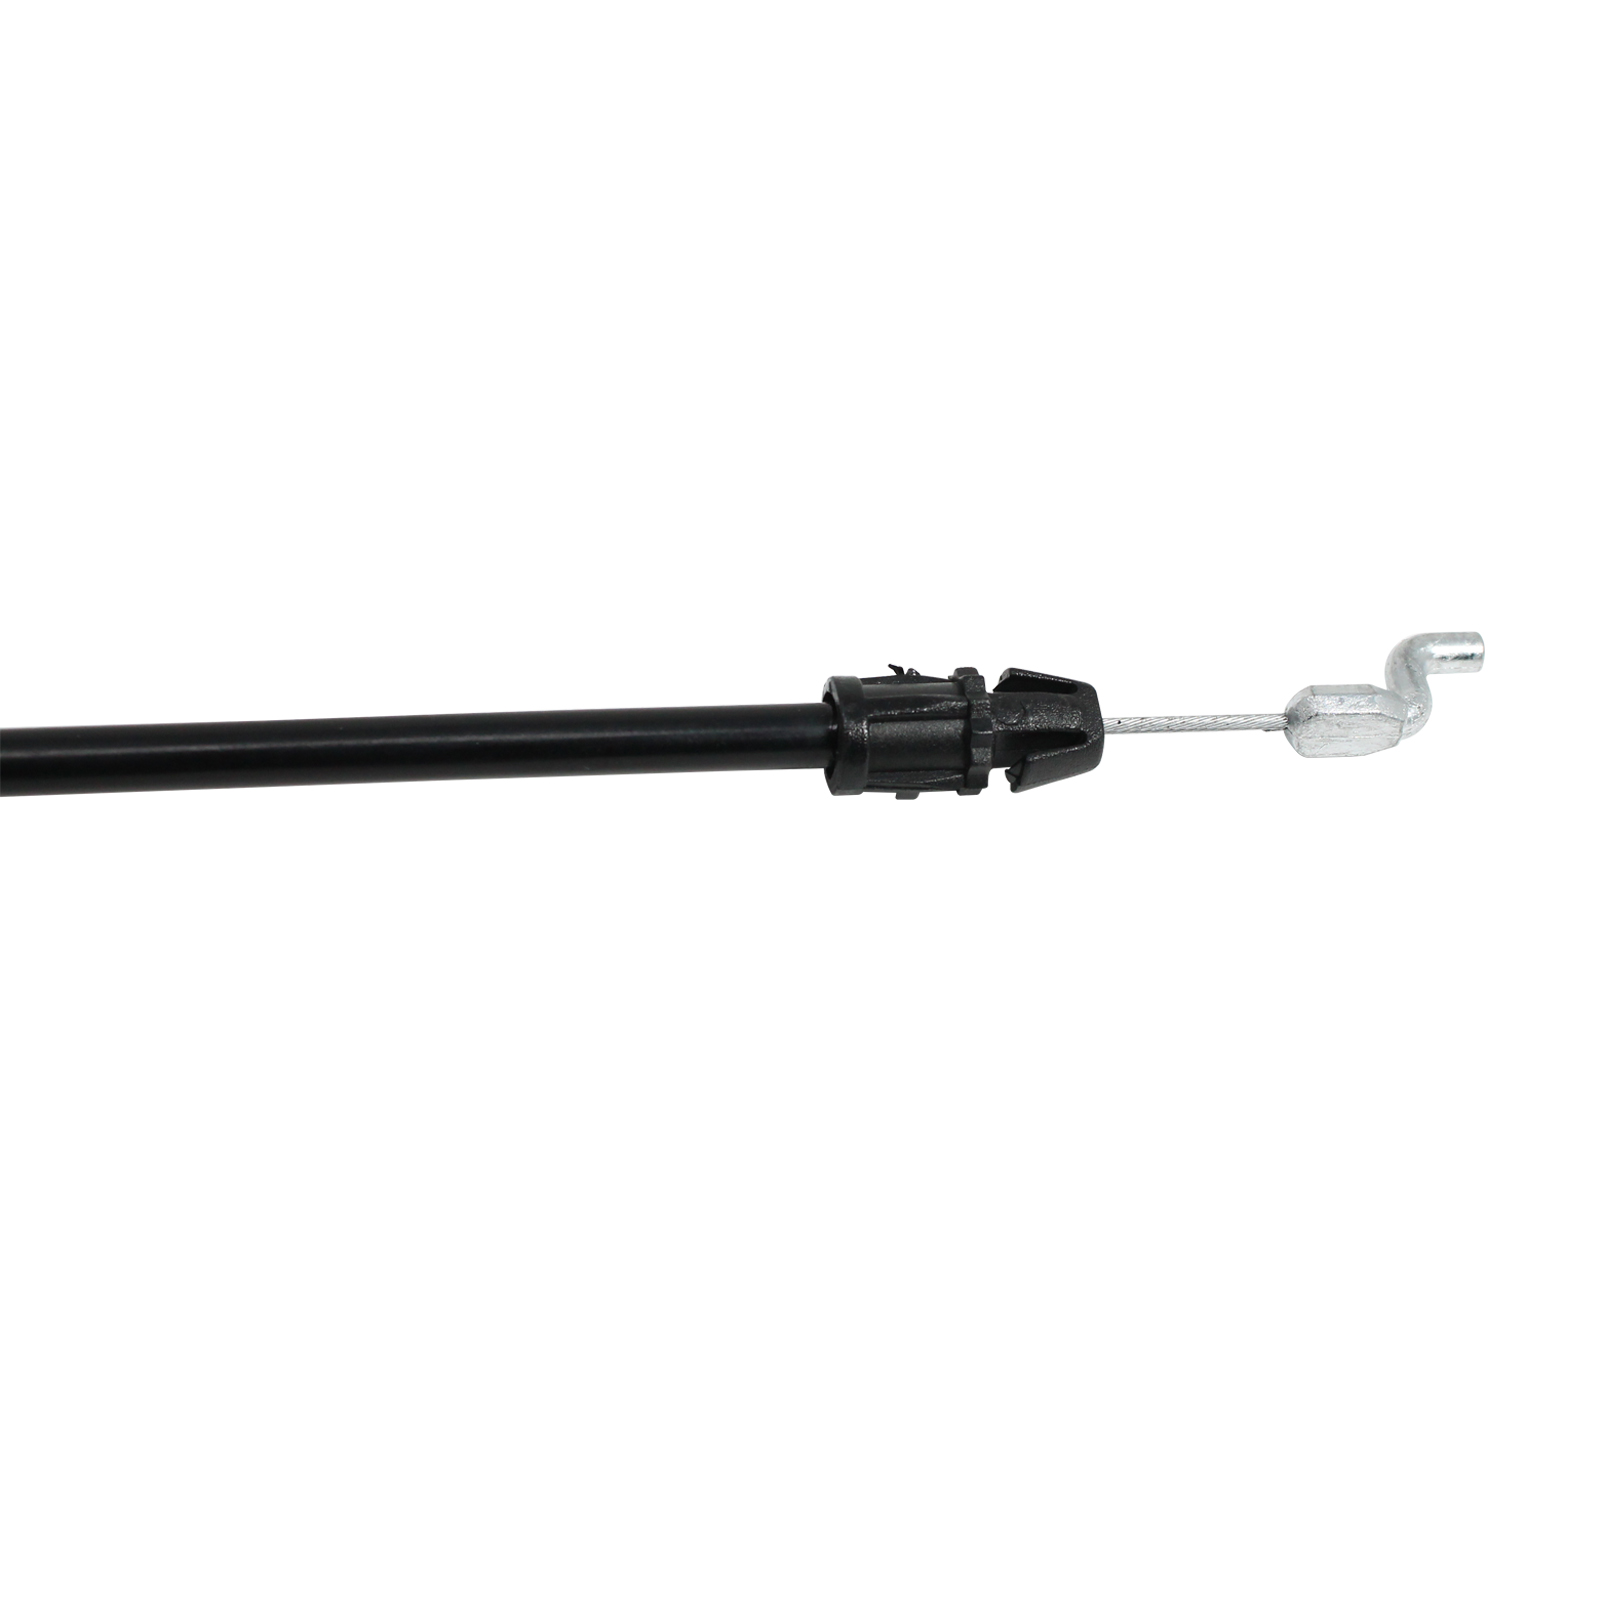 532176556 Engine Cable Replacement for Husqvarna ROTARY LAWN MOWER (96114000708) (2007-05) Lawn Mower: Consumer Walk Behind - Compatible with 176556 162778 Zone Control Cable - image 3 of 4